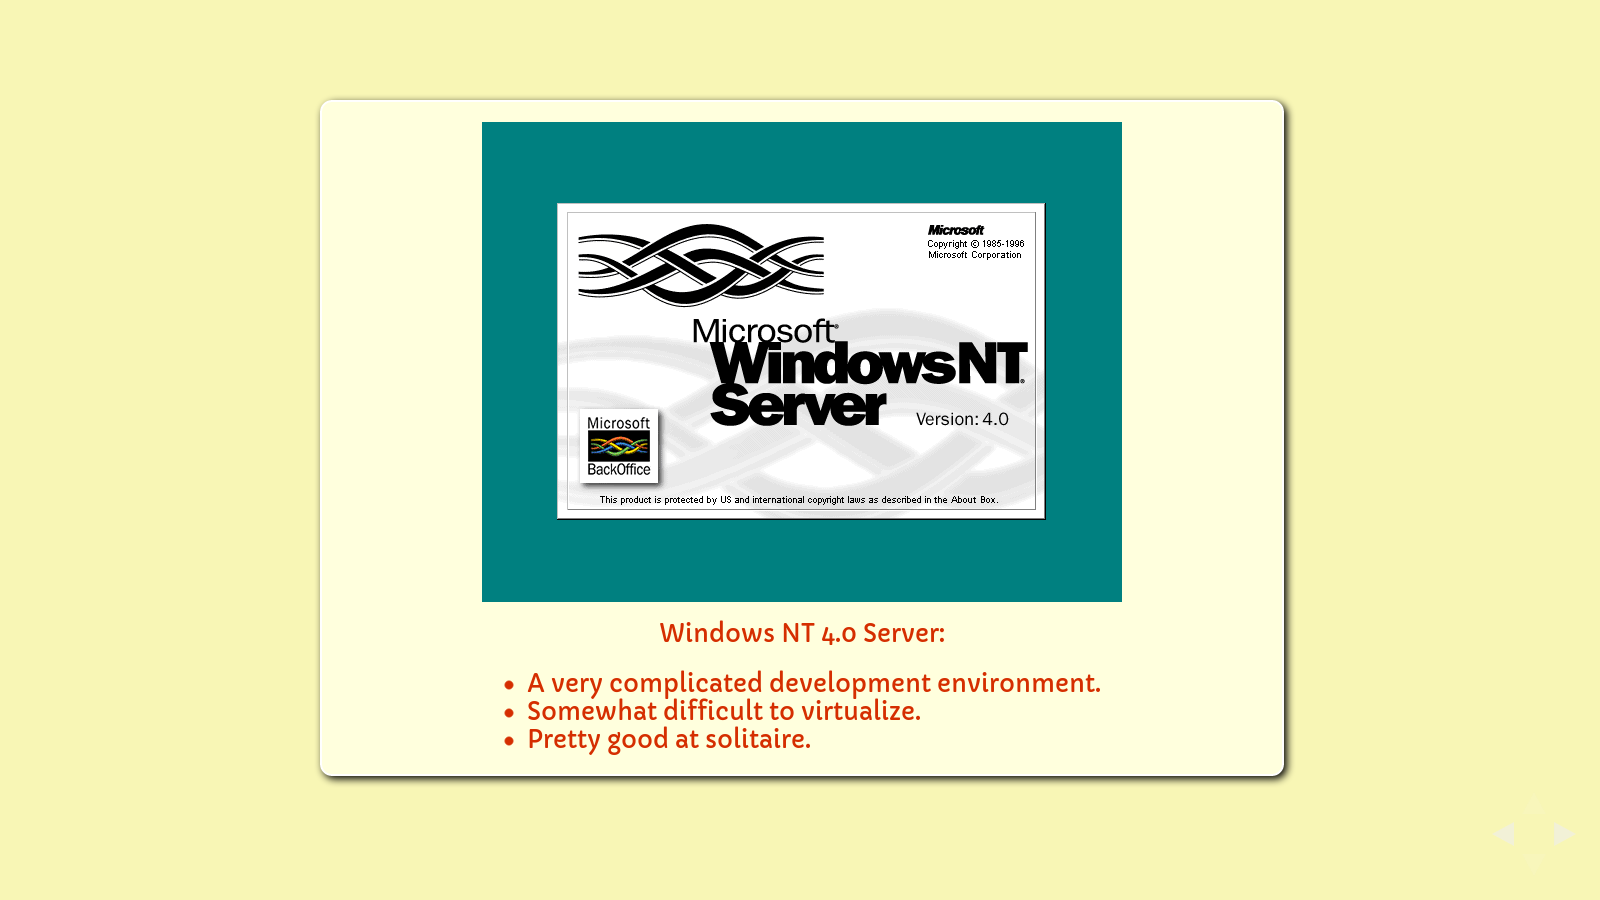 Slide: Windows NT 4.0 Server. A very complicated development environment. Not too terribly hard to virtualize. Pretty good at Tic Tac Toe.